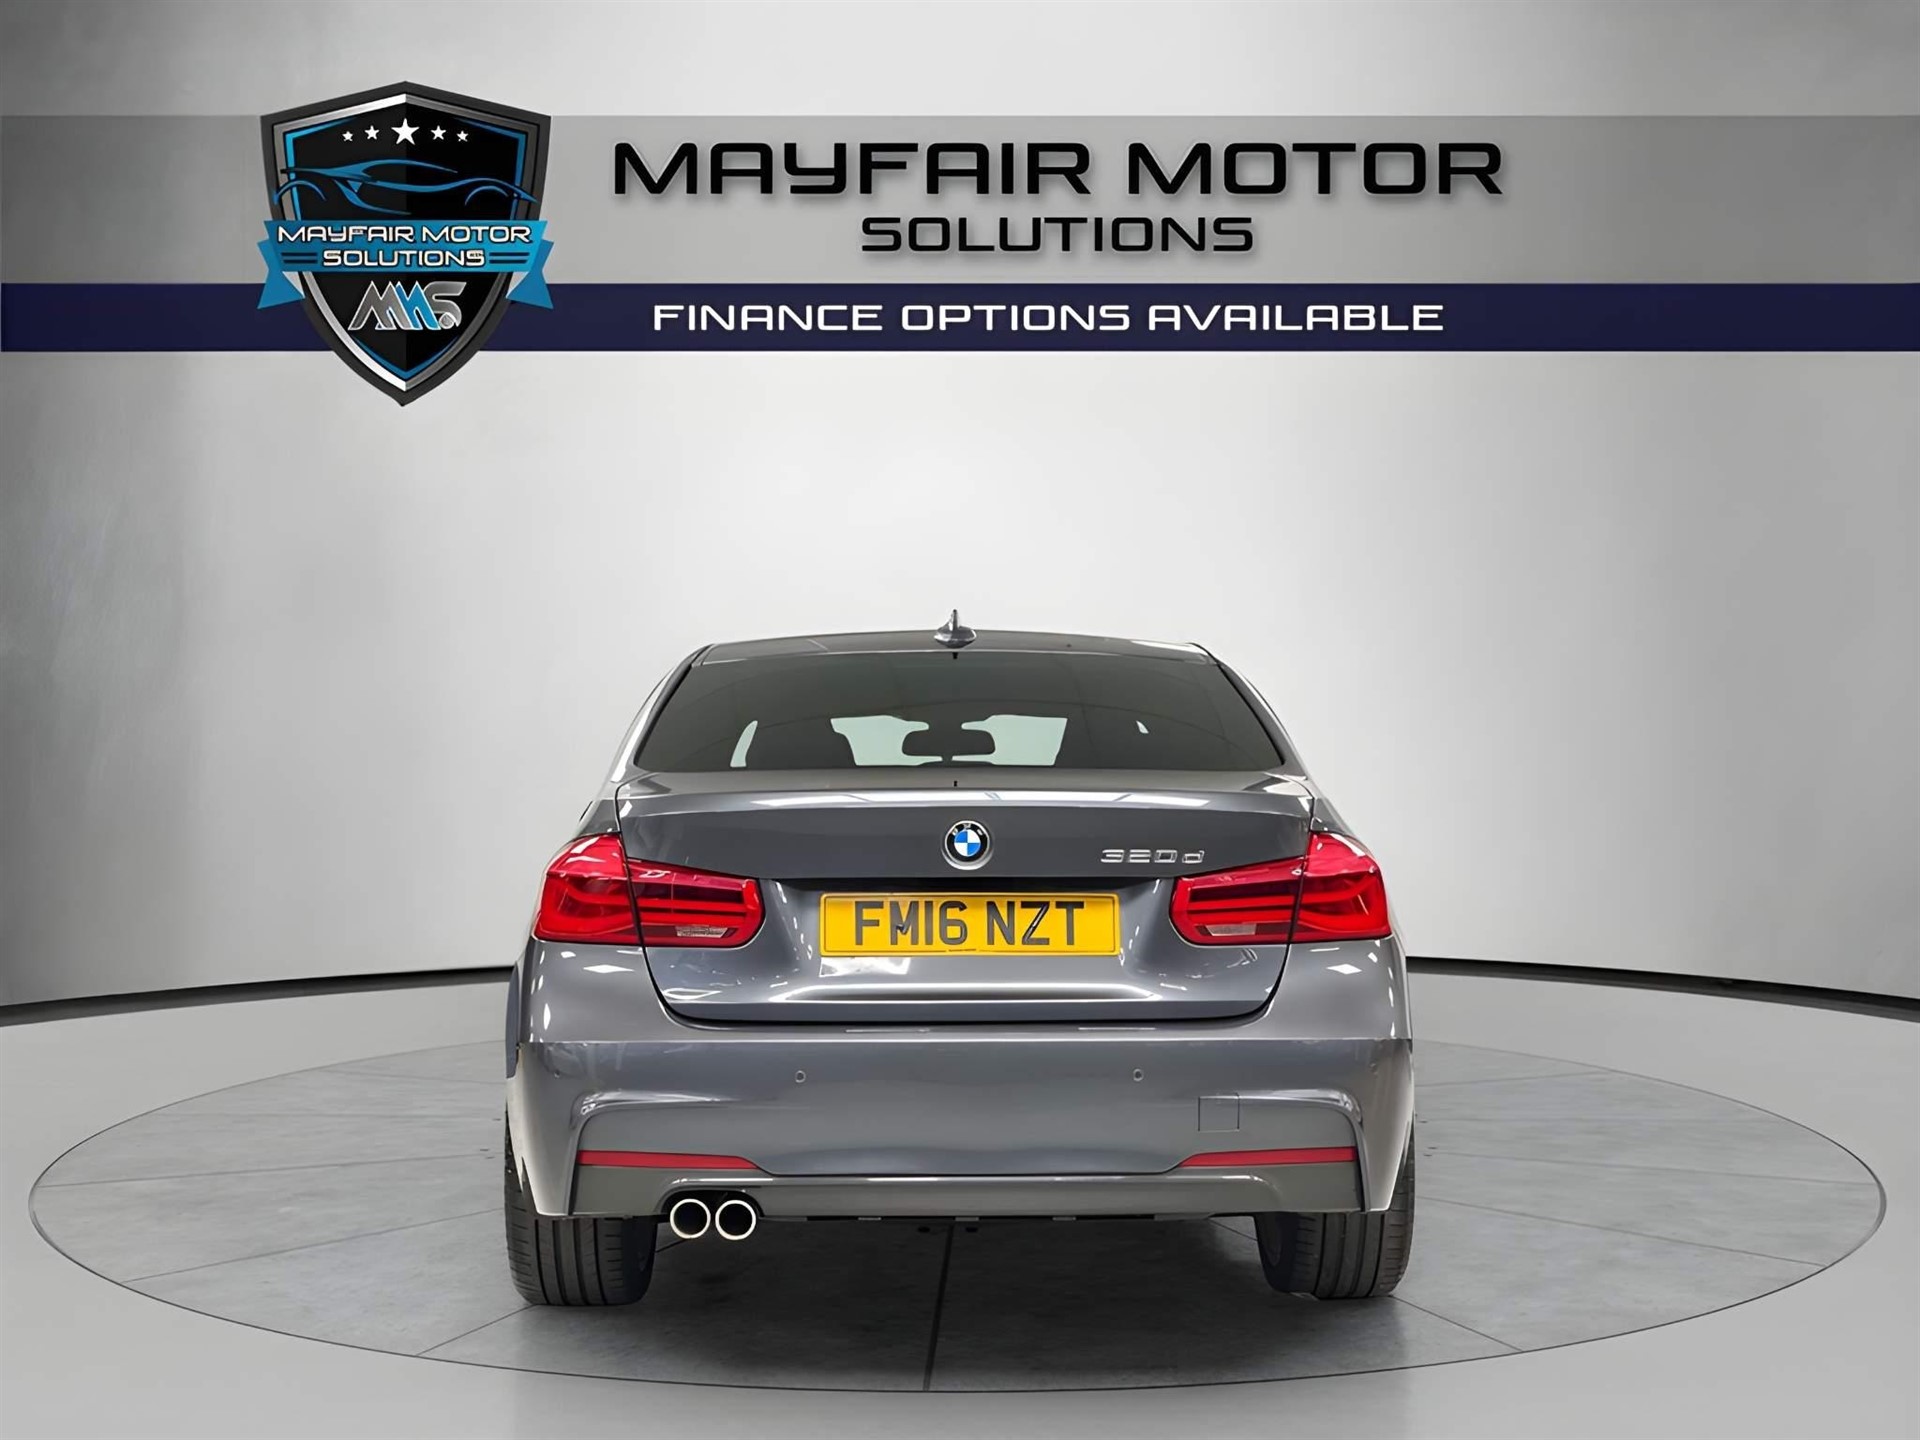 Used BMW 320d for sale in Marble Arch, London | Mayfair Motor 